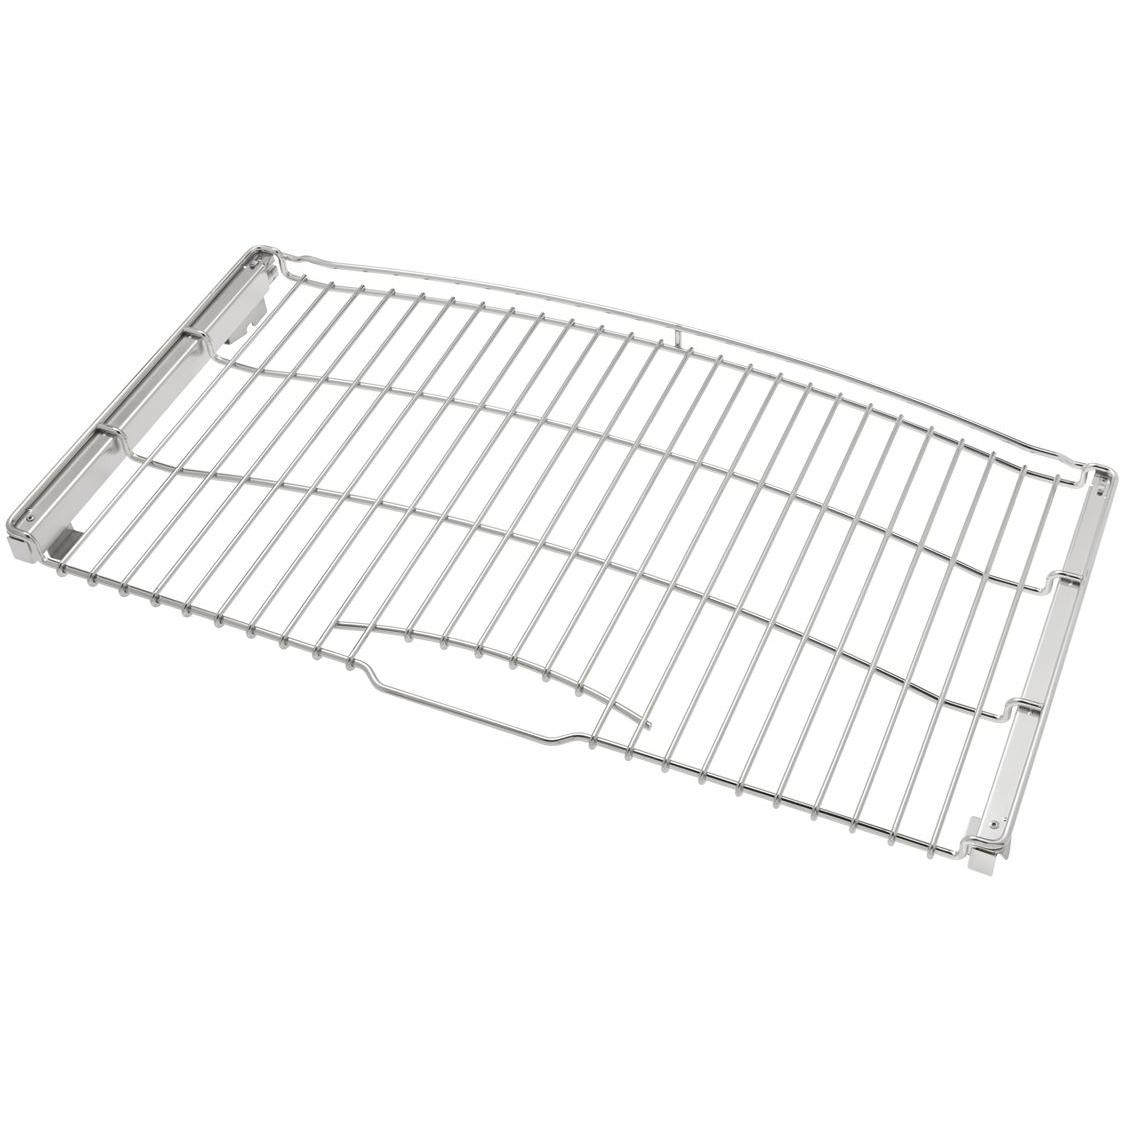 Wolf 36-inch Full-extension ball-bearing oven rack 9022538 IMAGE 1